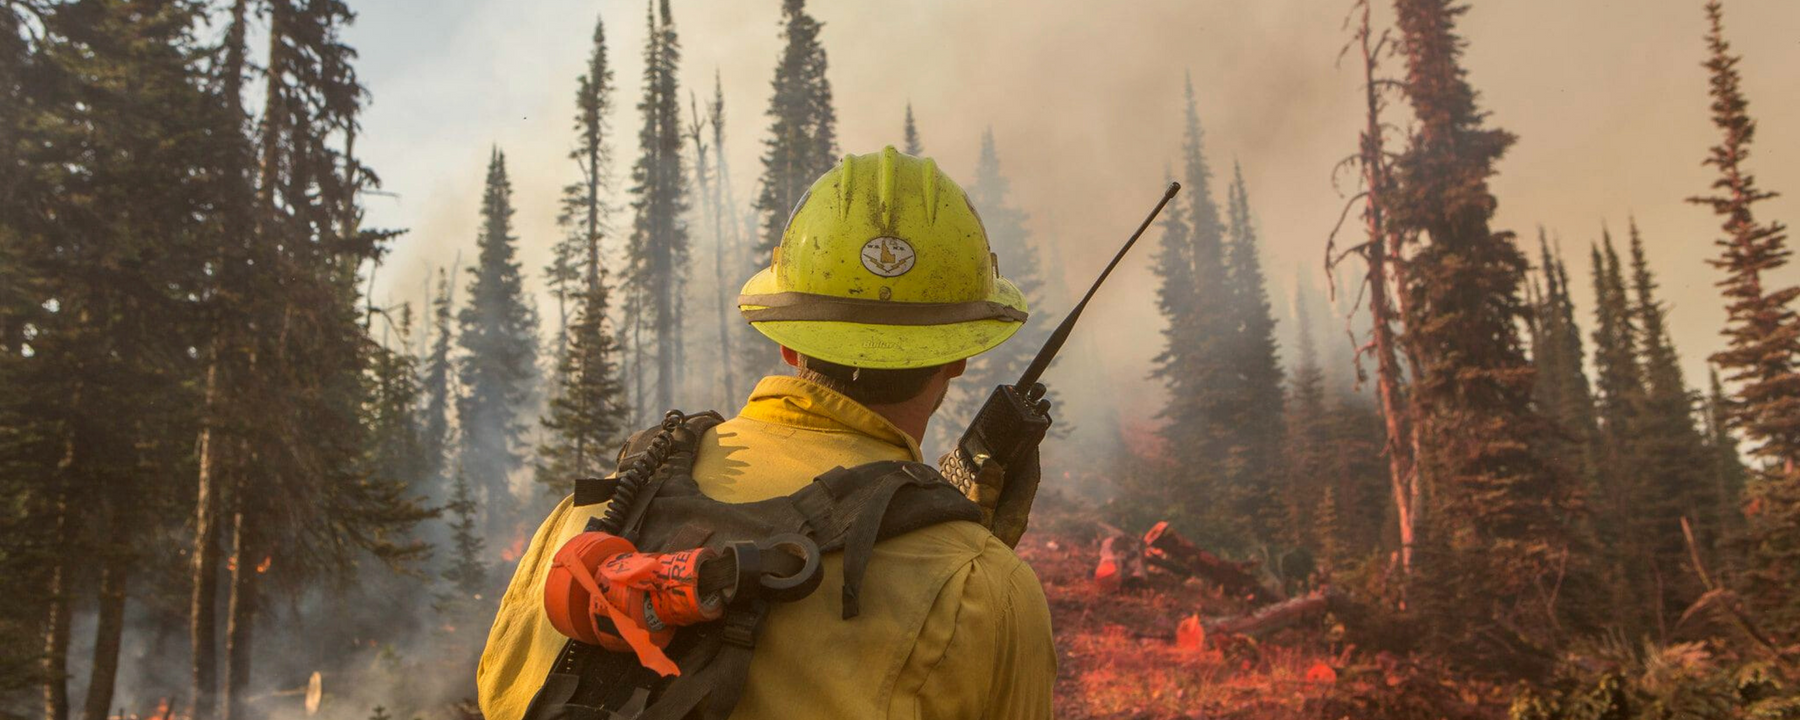 A wildland firefighter is shown in a forest with flames in the background. They are holding a radio.